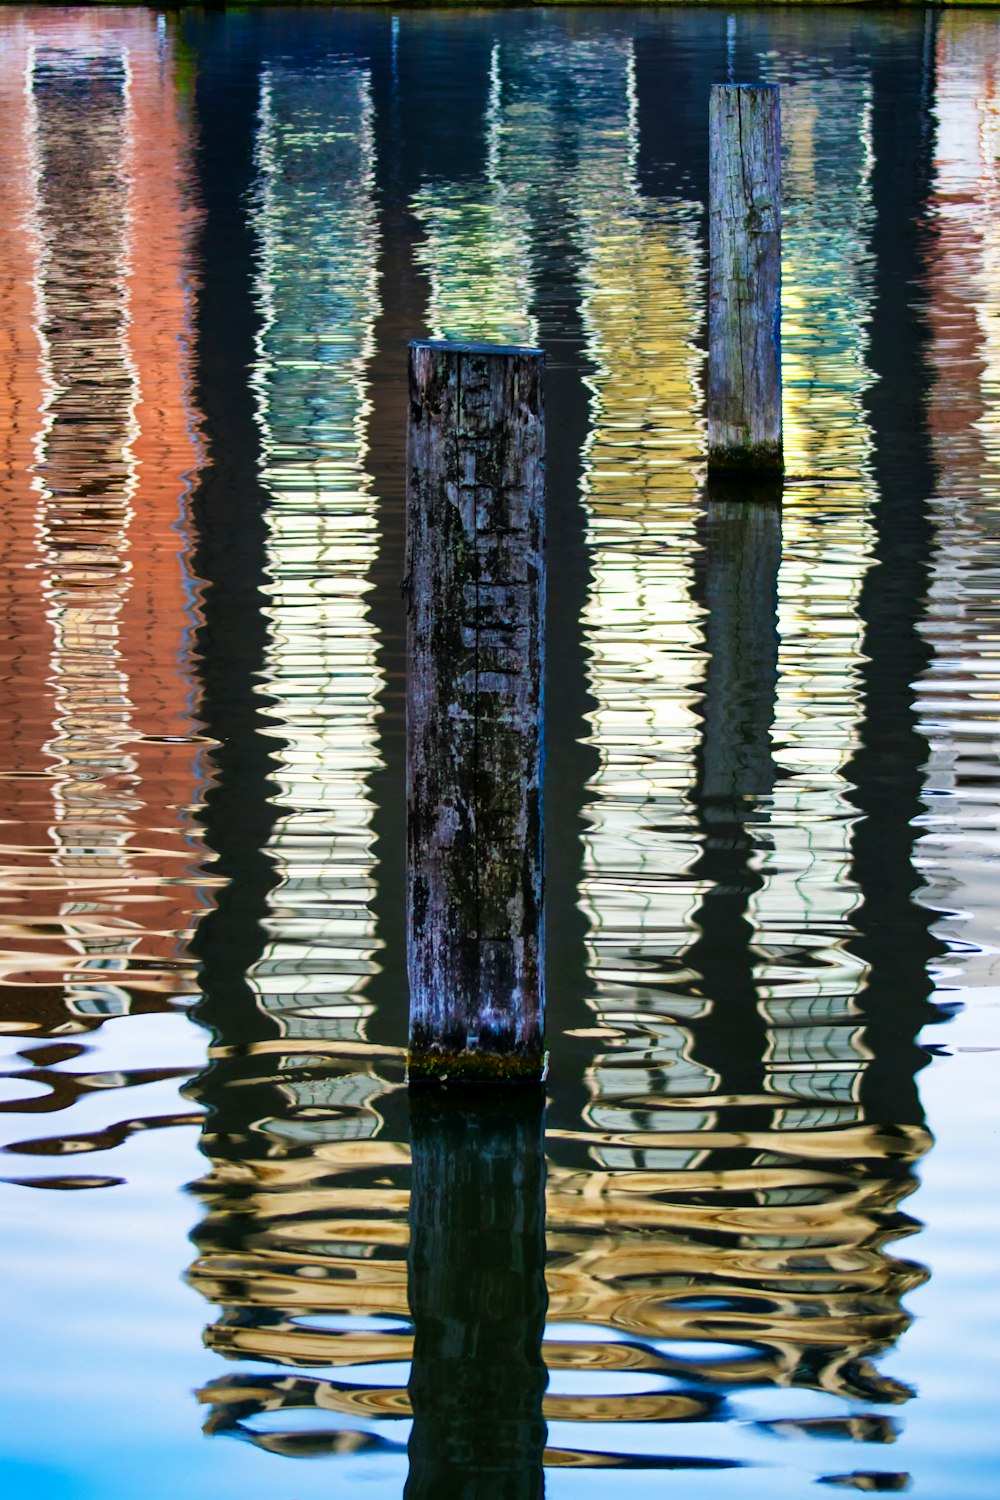 brown wooden posts on water